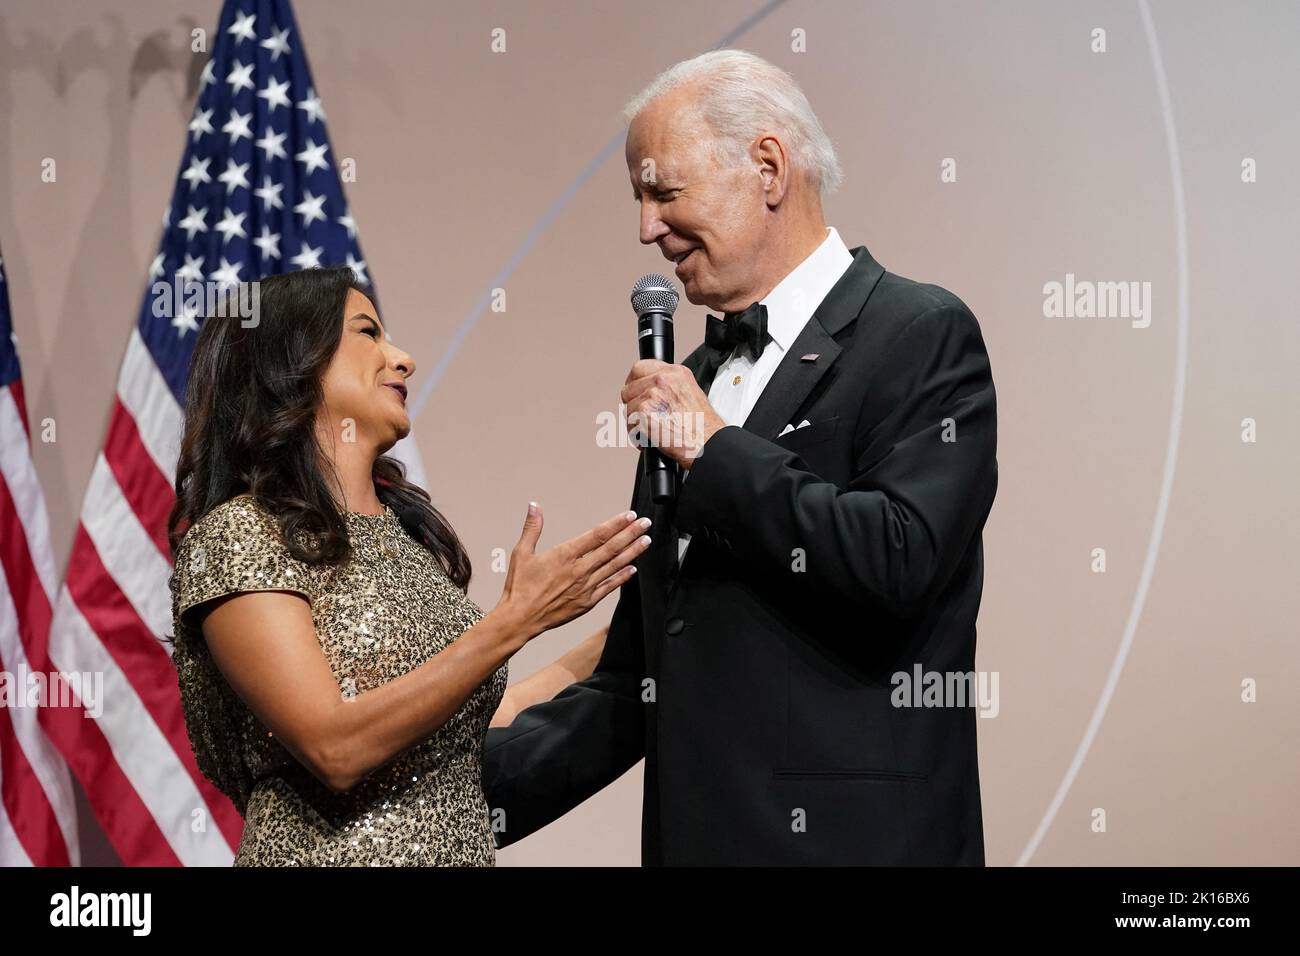 U.S. President Joe Biden speaks with U.S. Rep. Nanette Barragan (D-CA) as he attends the 45th Congressional Hispanic Caucus Institute Gala to kick-off the White House's celebration of Hispanic Heritage Month, in Washington, U.S. September 15, 2022. REUTERS/Kevin Lamarque Stock Photo